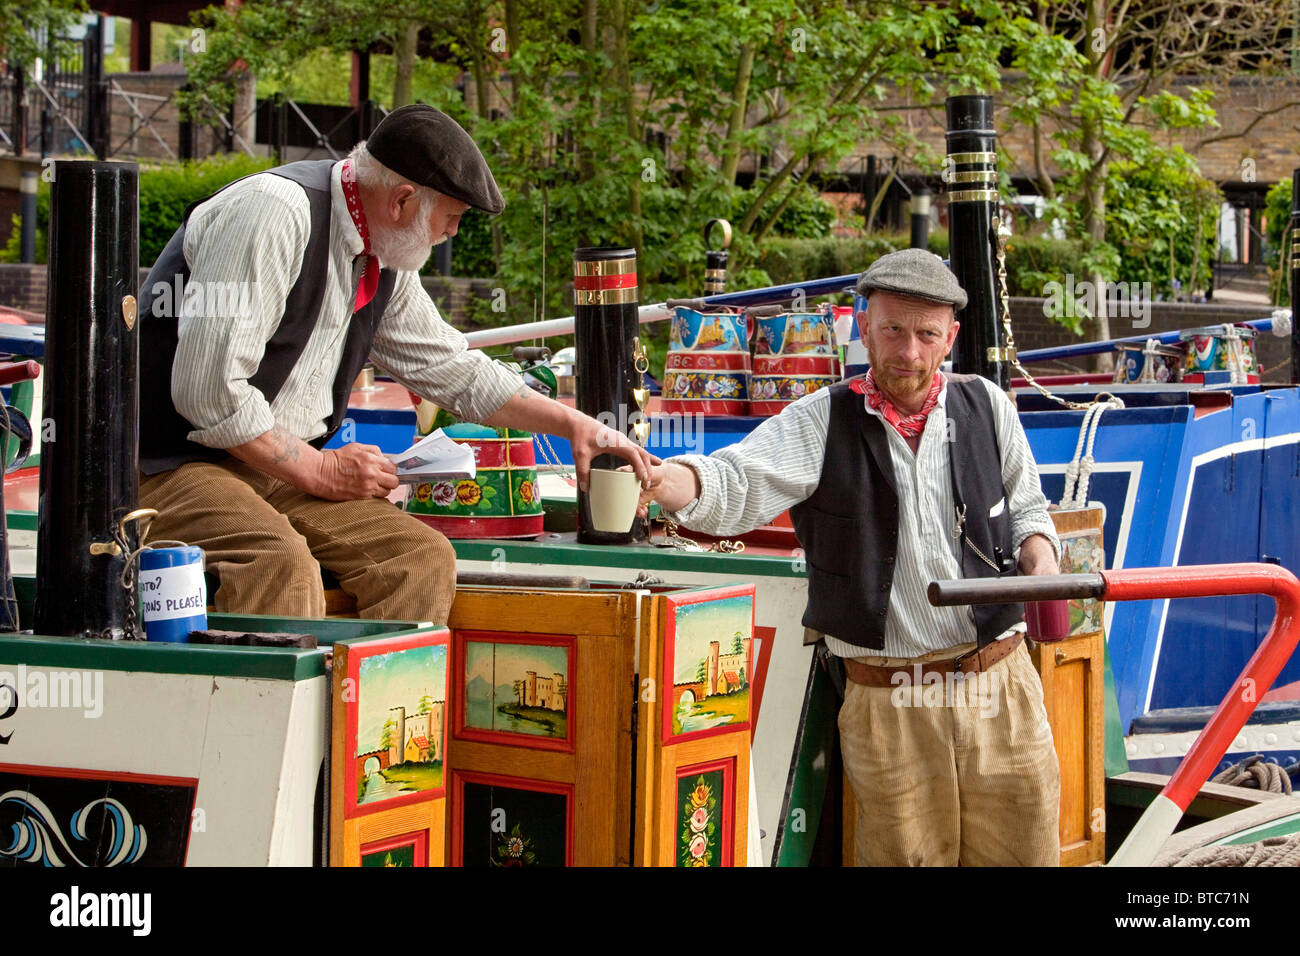 A tea break for these enthusiasts who volunteer their time to work on this historic narrow boat. DAVID MANSELL Stock Photo